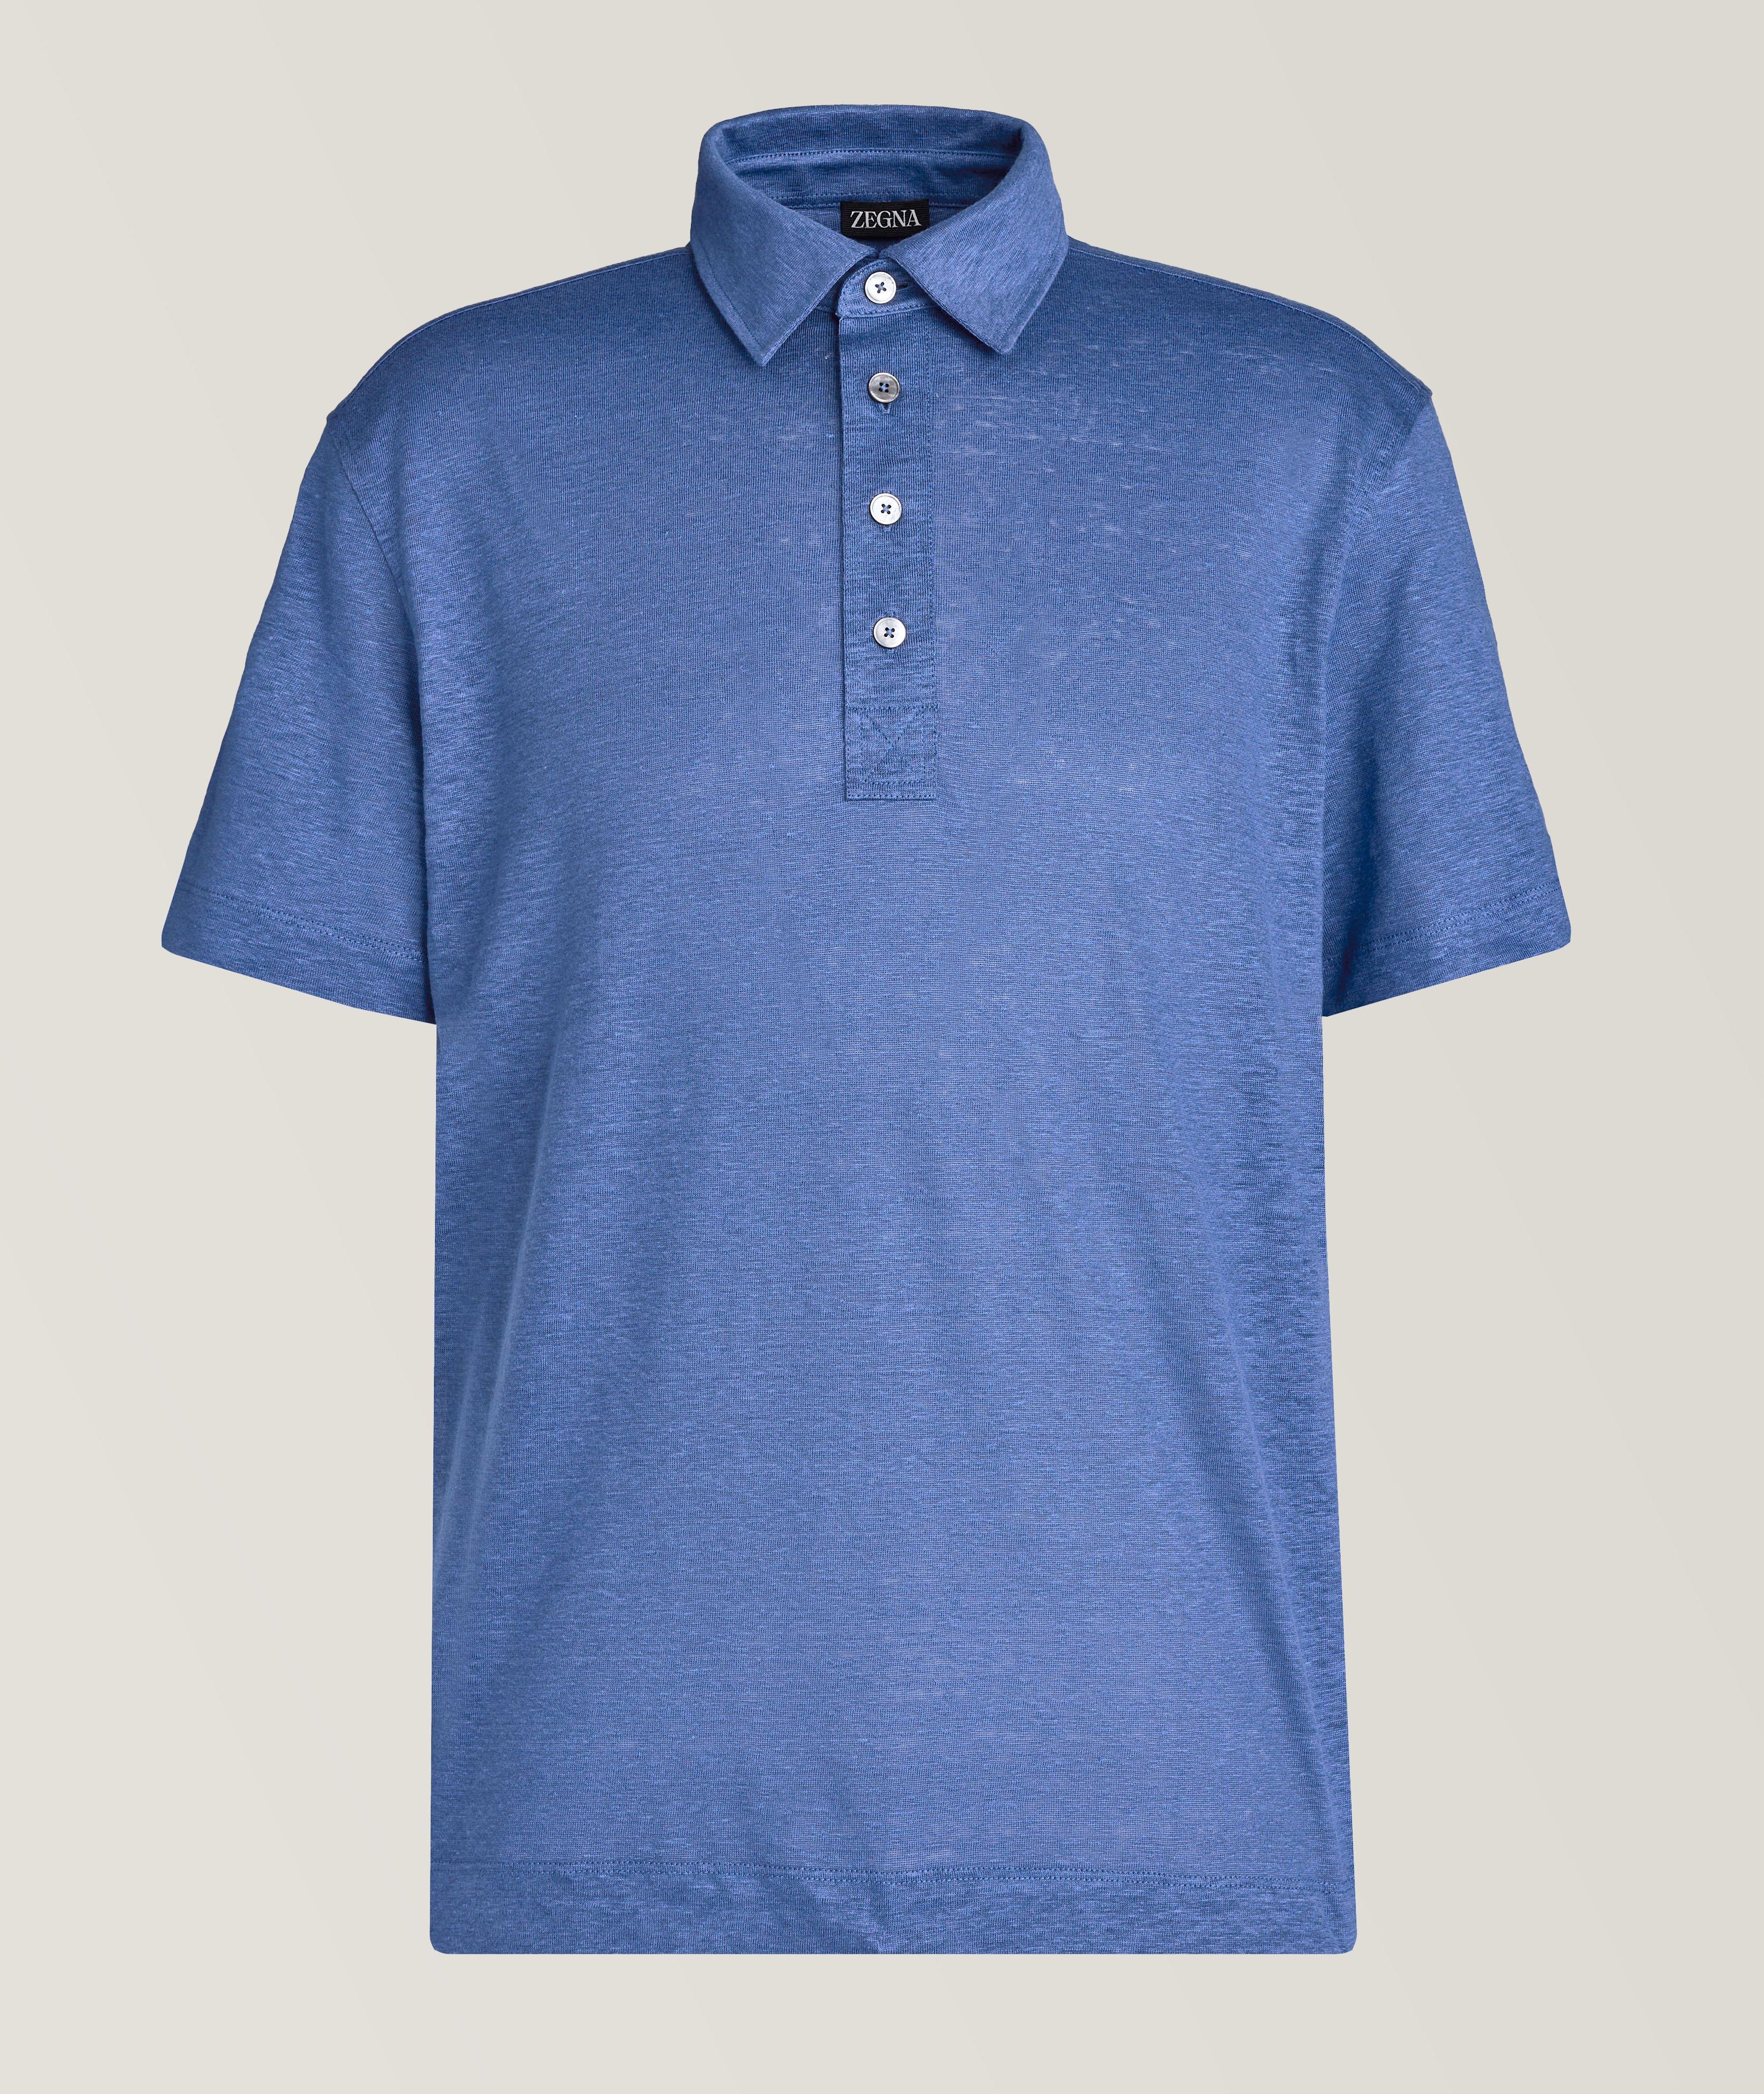 Solid Linen Polo image 0